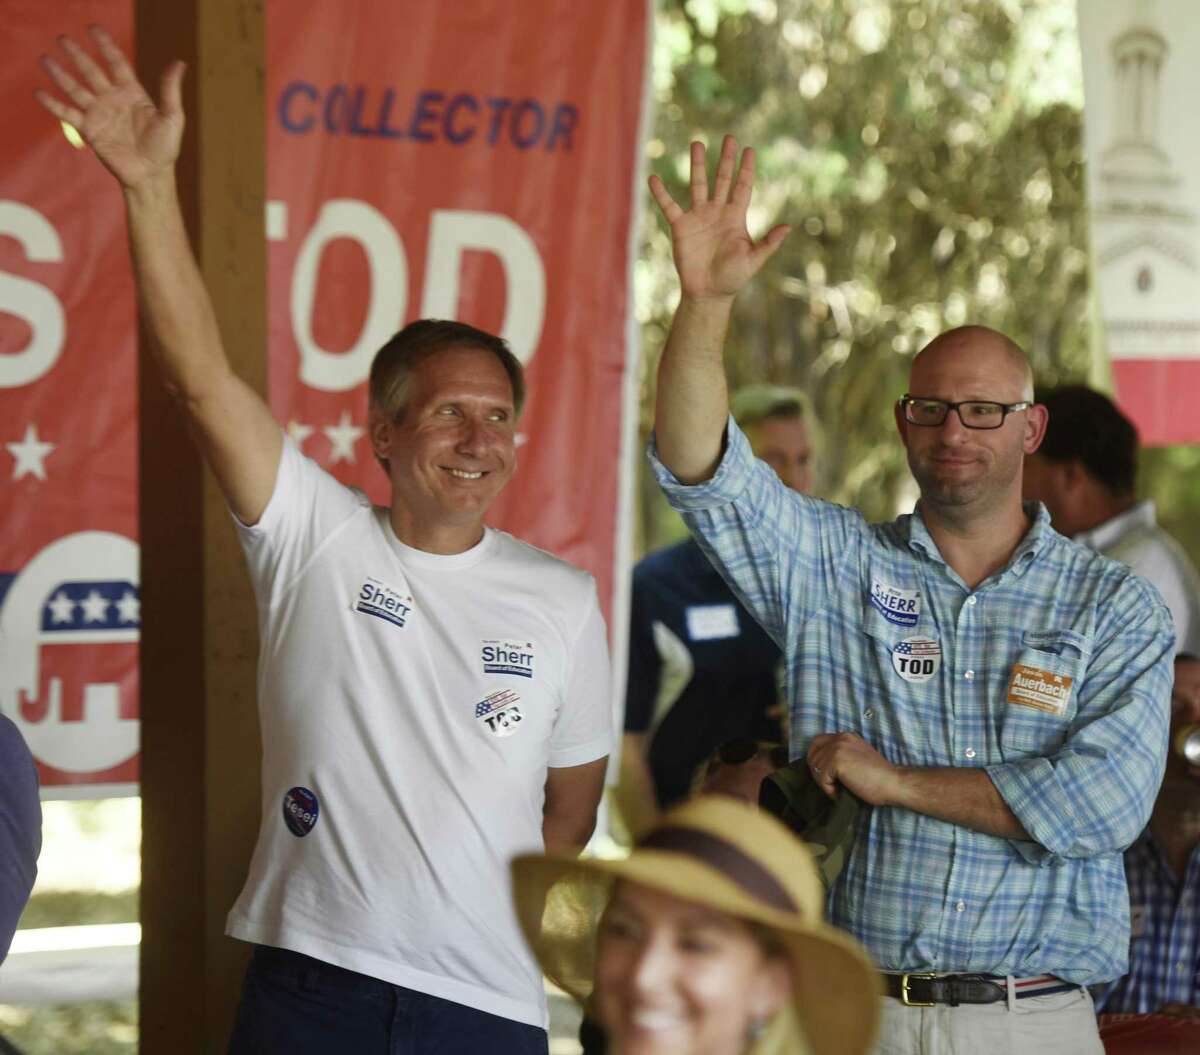 Incumbent Board of Education Chairman Peter Sherr, left, and Board of Education nominee Jason Auerbach wave to the crowd at the annual Republican clambake at Greenwich Point Park in Old Greenwich, Conn. Sunday, Sept. 24, 2017. First Selectman Peter Tesei, Selectman John Toner, Tax Collector Tod Laudonia and other Republican candidates spoke to rally the base before the upcoming municipal election on November 7.